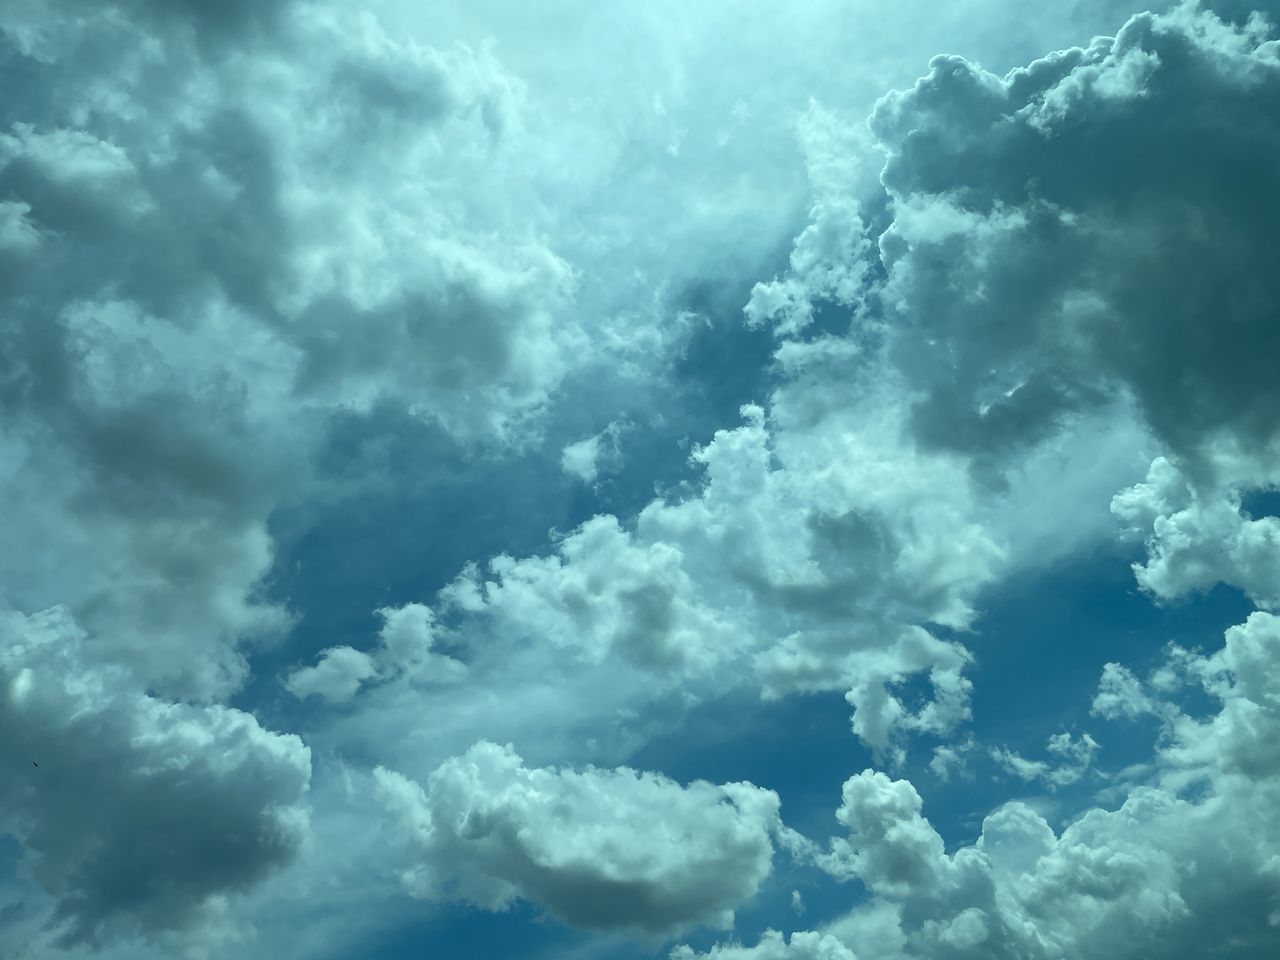 sky, cloud, daytime, cloudscape, backgrounds, nature, environment, dramatic sky, beauty in nature, overcast, blue, storm cloud, storm, no people, wind, scenics - nature, atmosphere, outdoors, fluffy, thunderstorm, idyllic, meteorology, sunlight, white, cumulonimbus, day, moody sky, tranquility, light - natural phenomenon, climate, wet, abstract